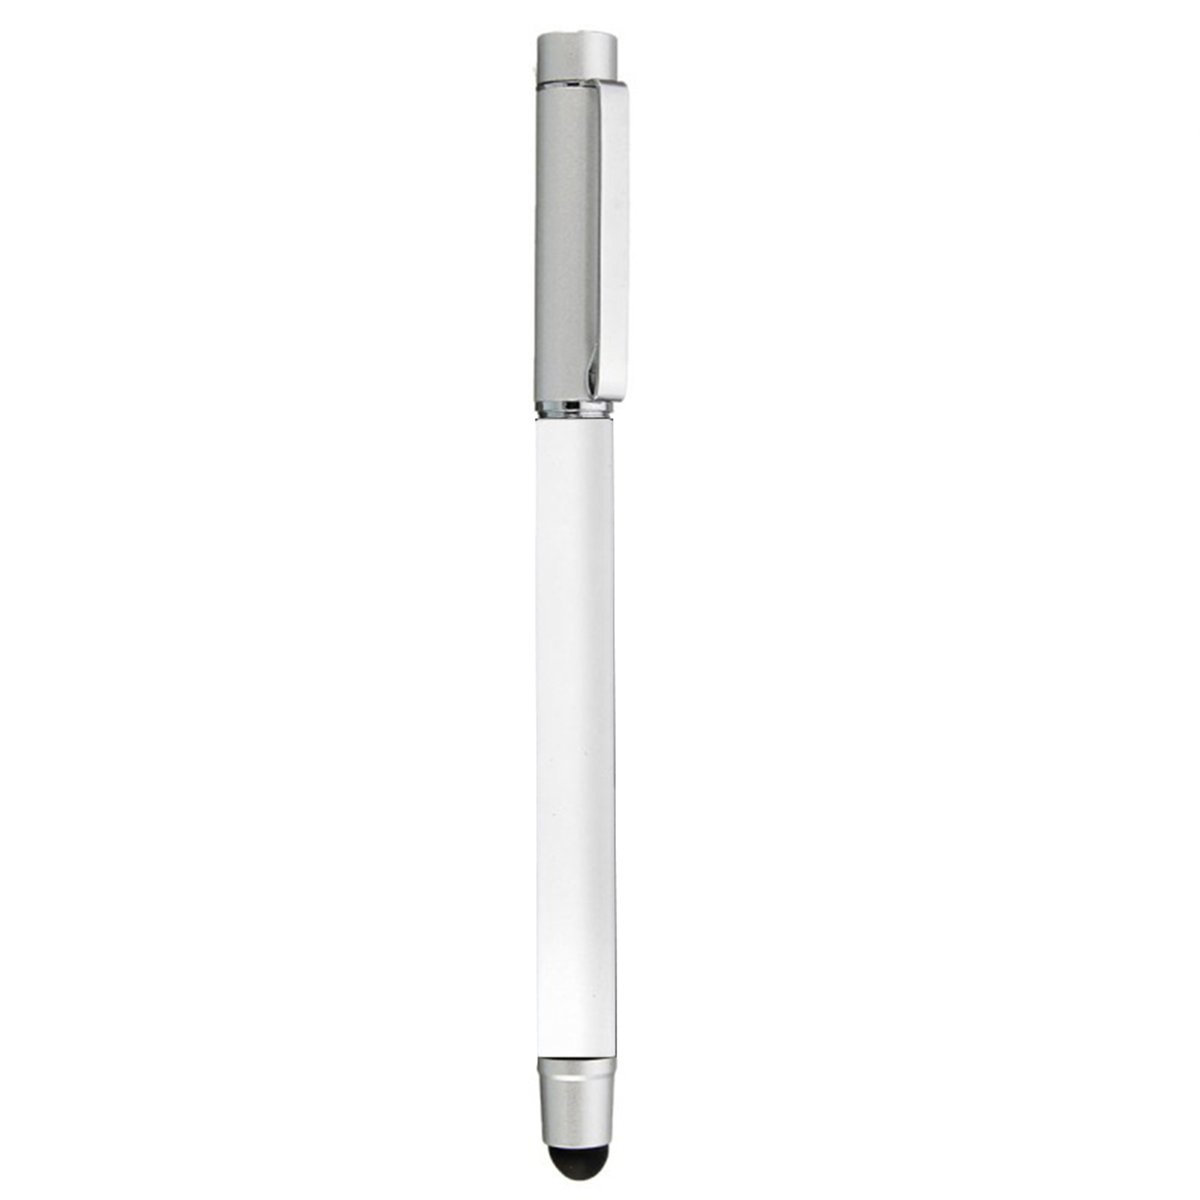 Trands Touch Screen Stylus Pen PN899(Assorted Colors)